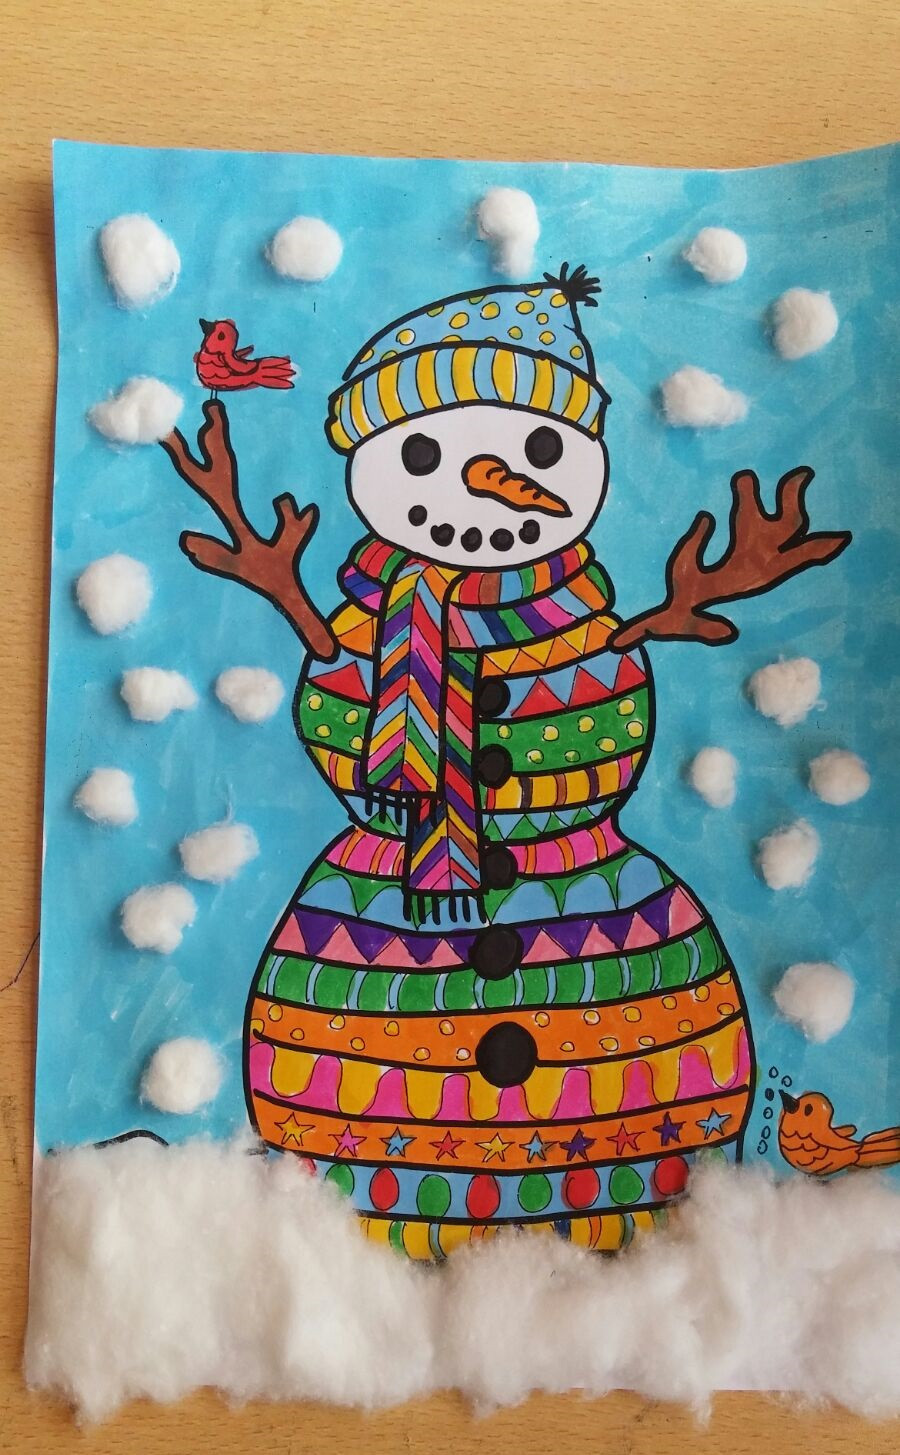 Craft For Children
 How to Make Snowman Craft for Kids Preschool and